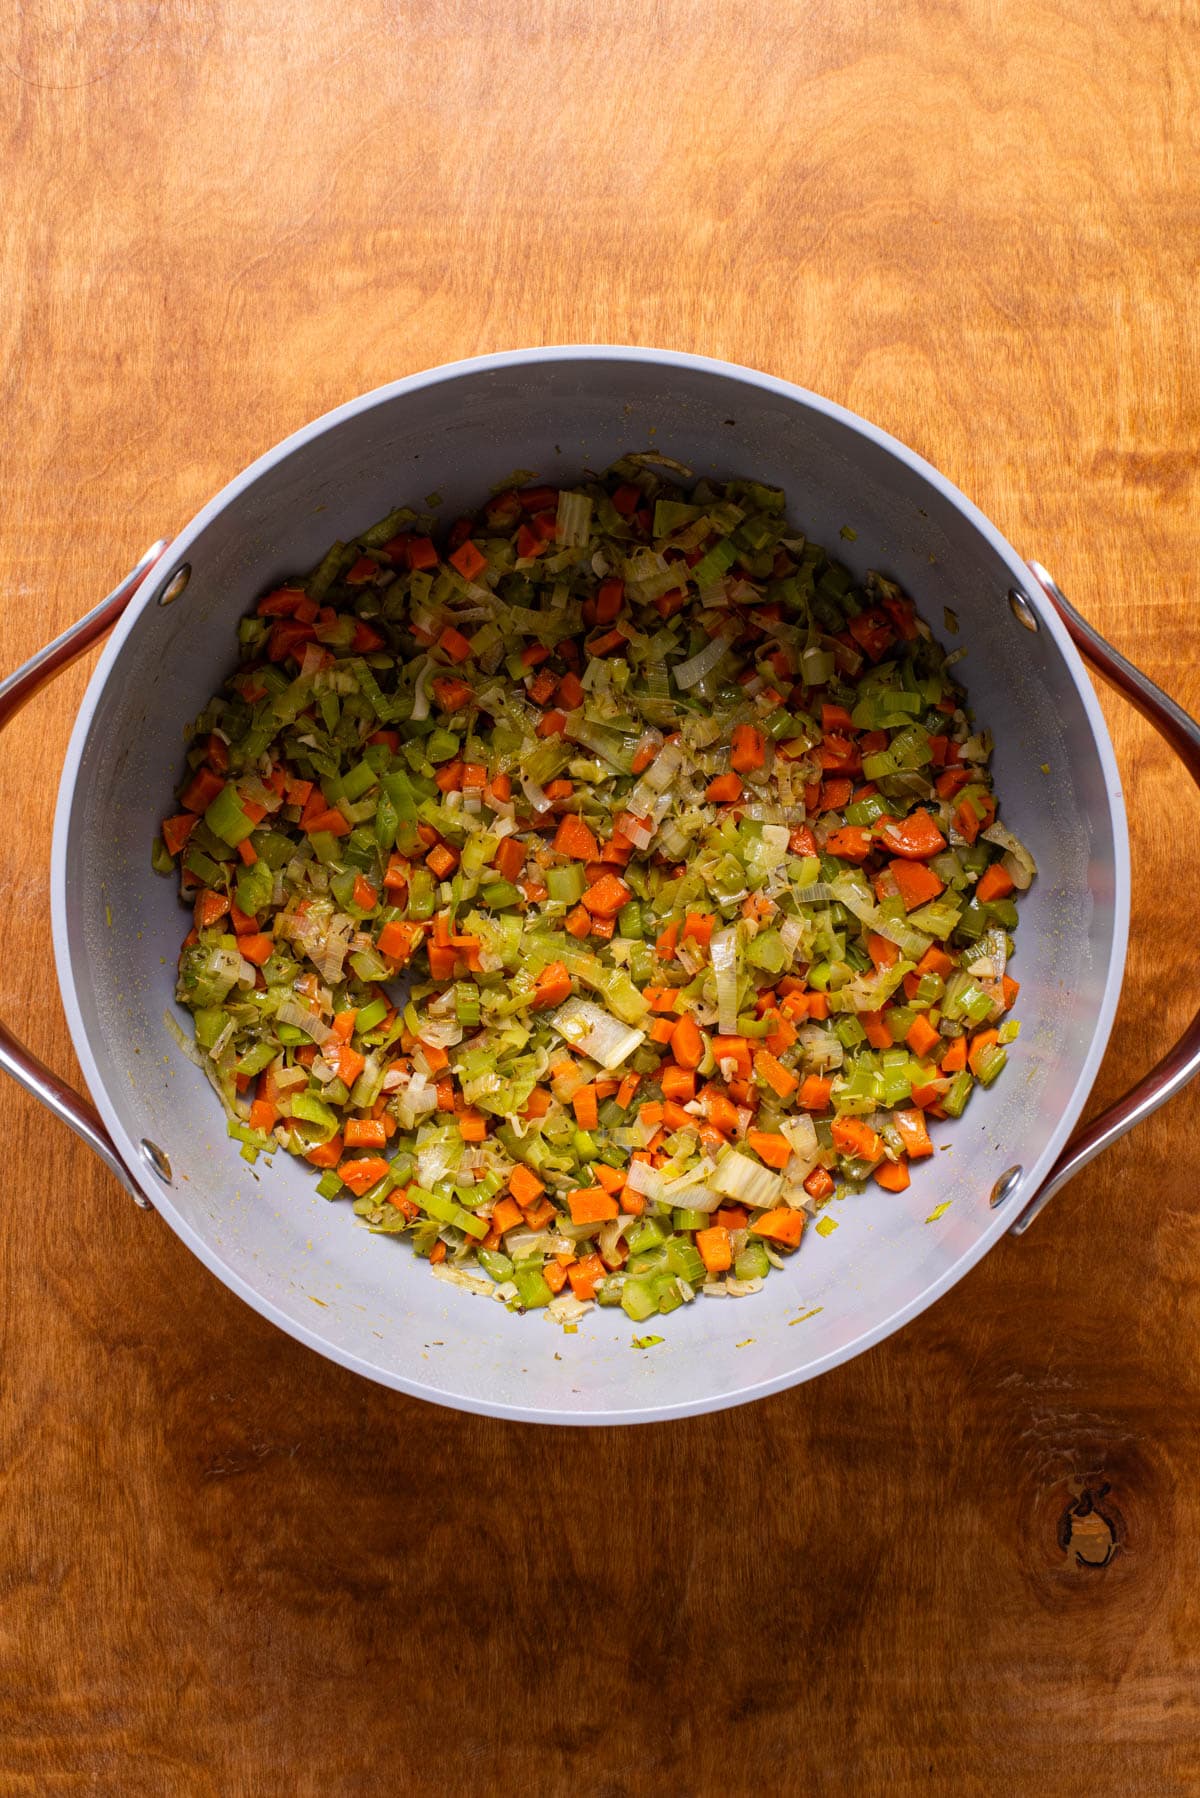 Sauteed mirepoix with leeks in a Dutch oven.